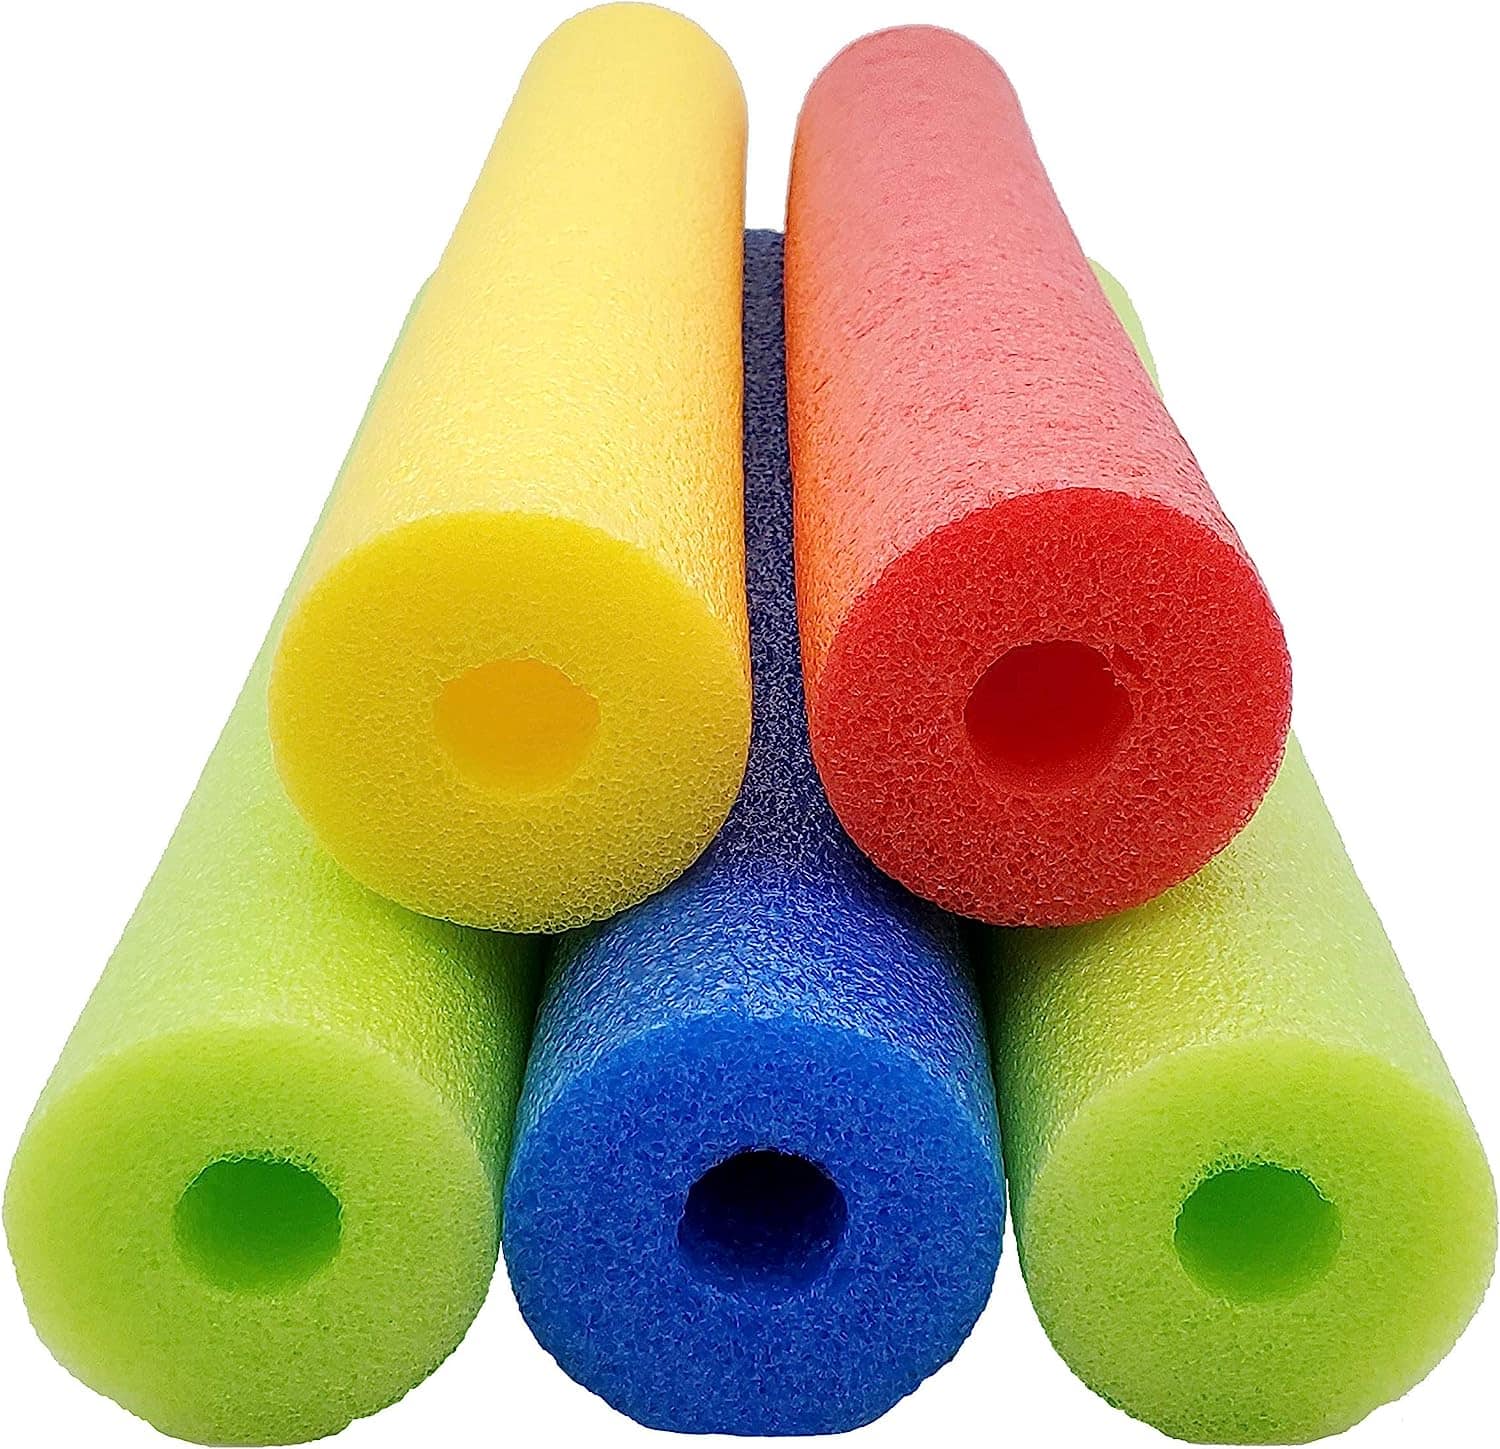 Multi-colored pool noodles 